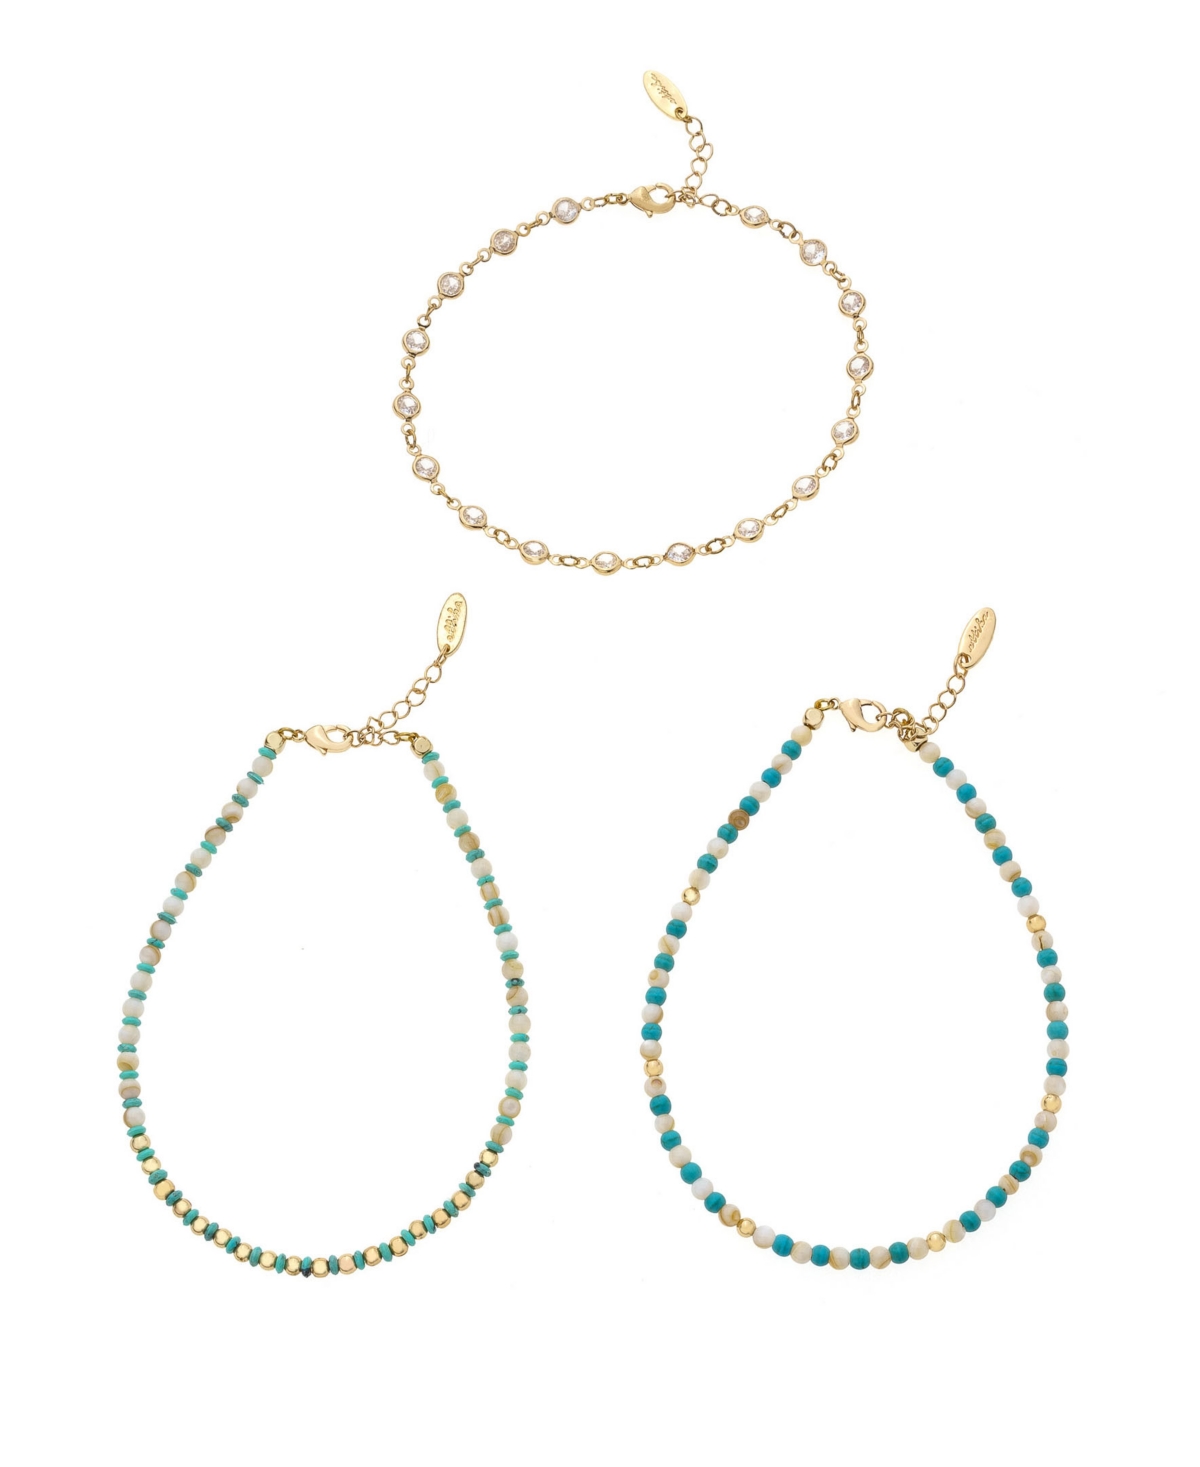 Turquoise and Imitation Pearl Anklet Set - Gold-Tone